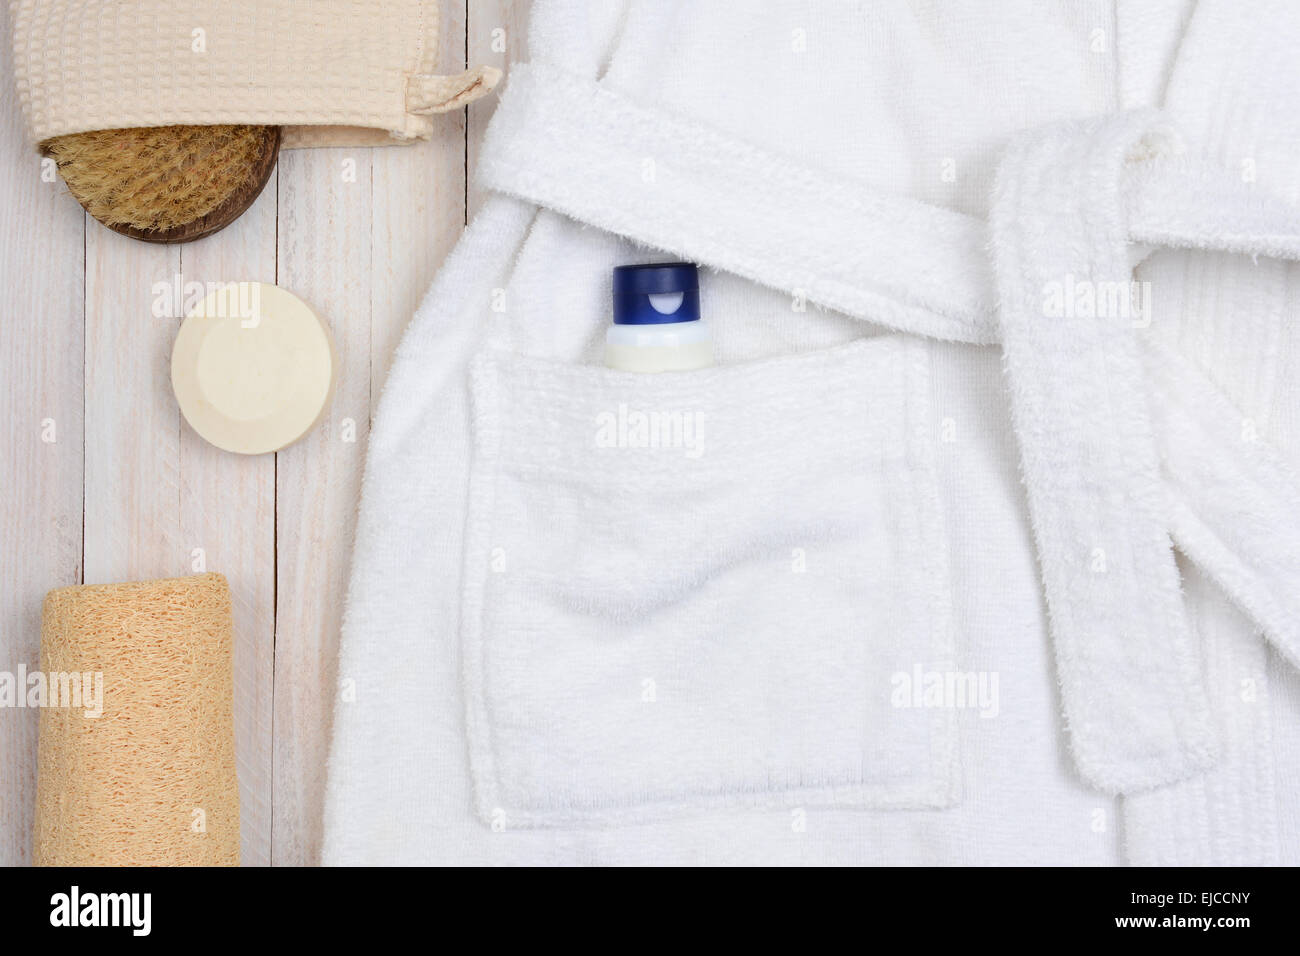 Closeup of a bathrobe with lotion in the pocket. A scrub brush and soap and a luffa are next to the robe on a rustic wooden surf Stock Photo